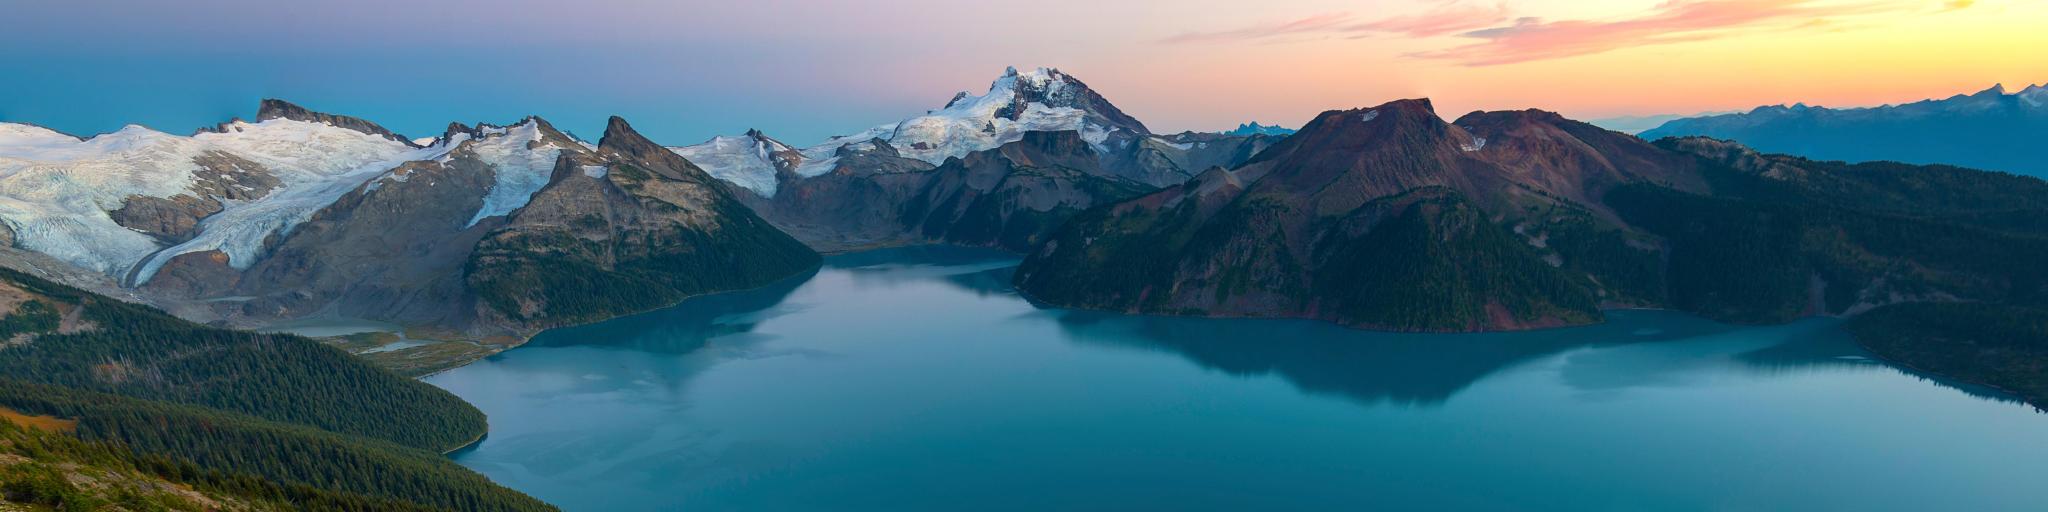 Garibaldi Provincial Park, Canada taken at sunset with a rocky landscape in the foreground, a lake and mountains in the distance. 